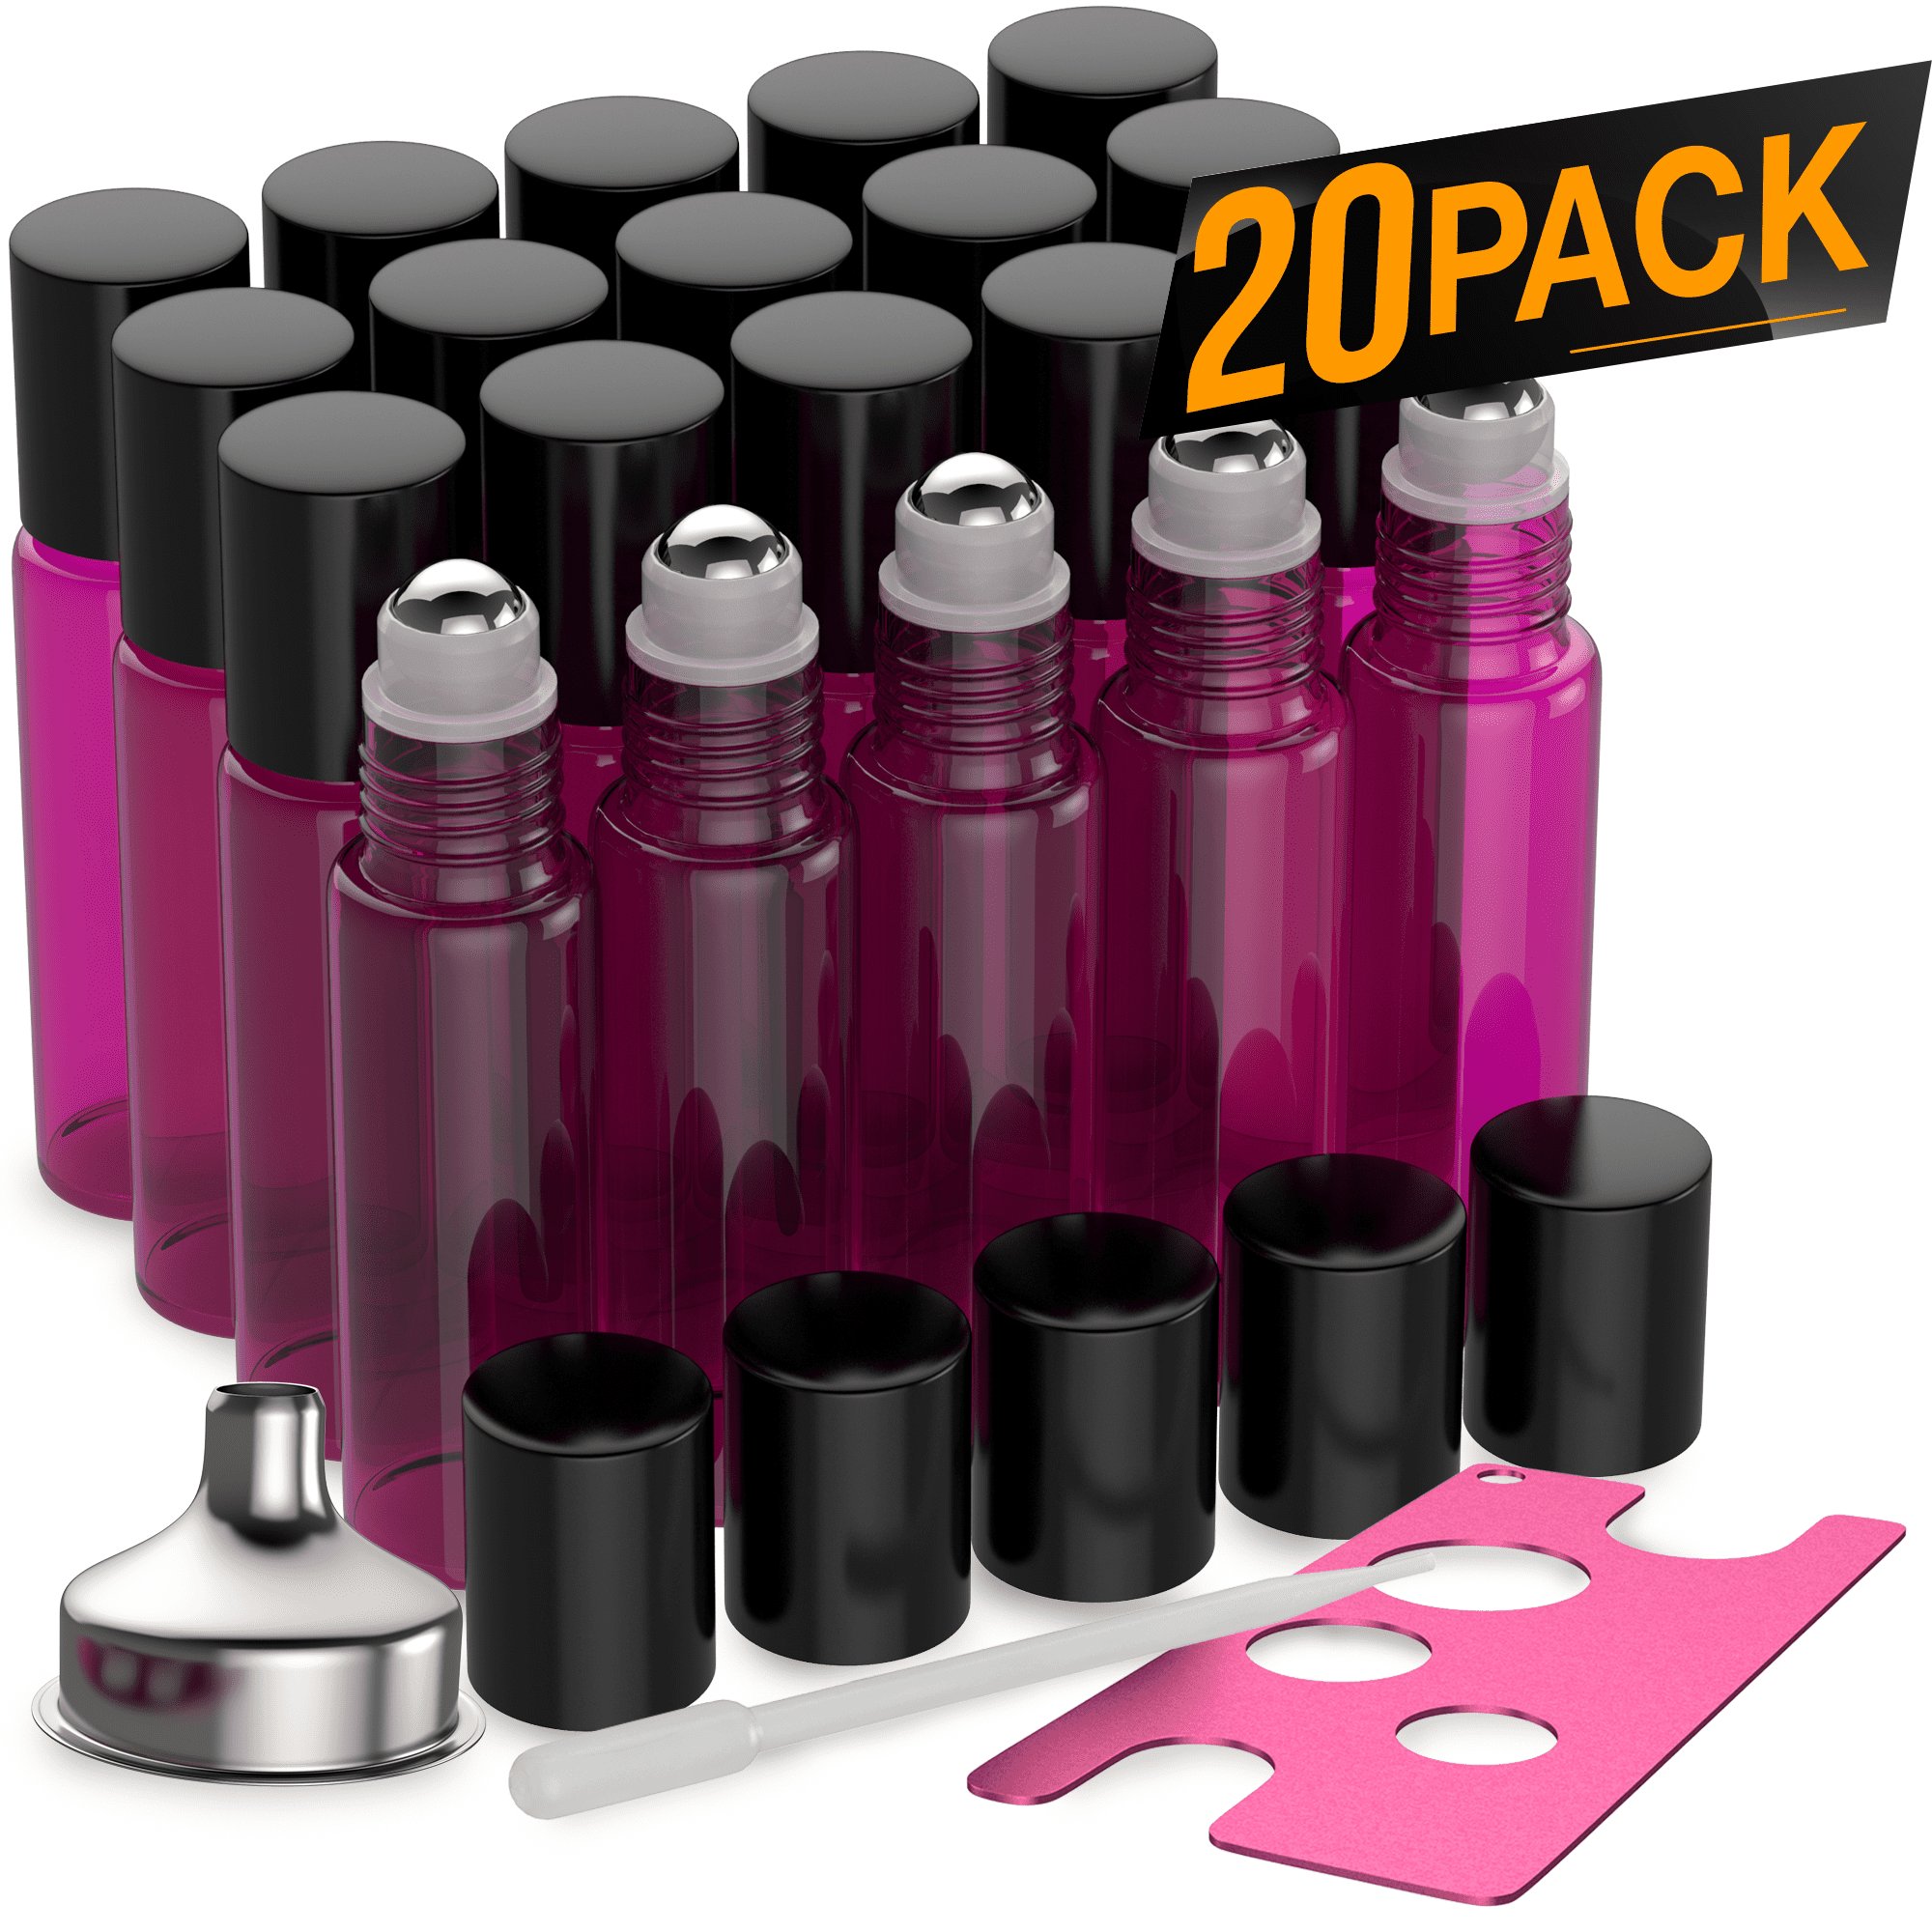 1000pc/lot 5ML Essential Oil Roller Bottles With Stainless steel